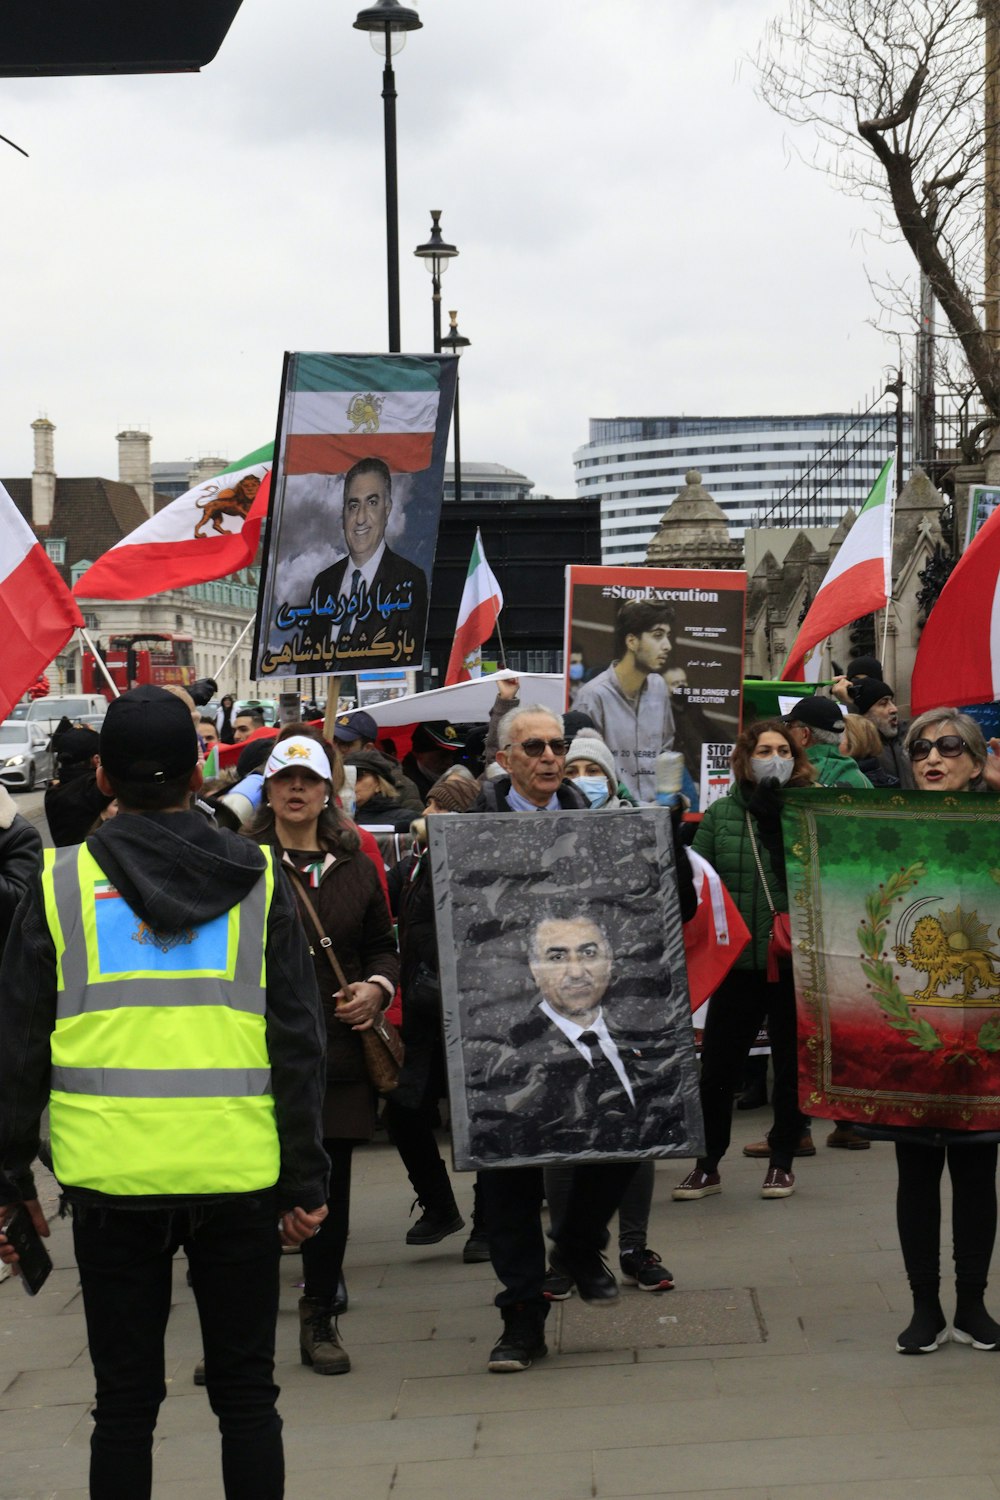 a group of people holding signs and flags